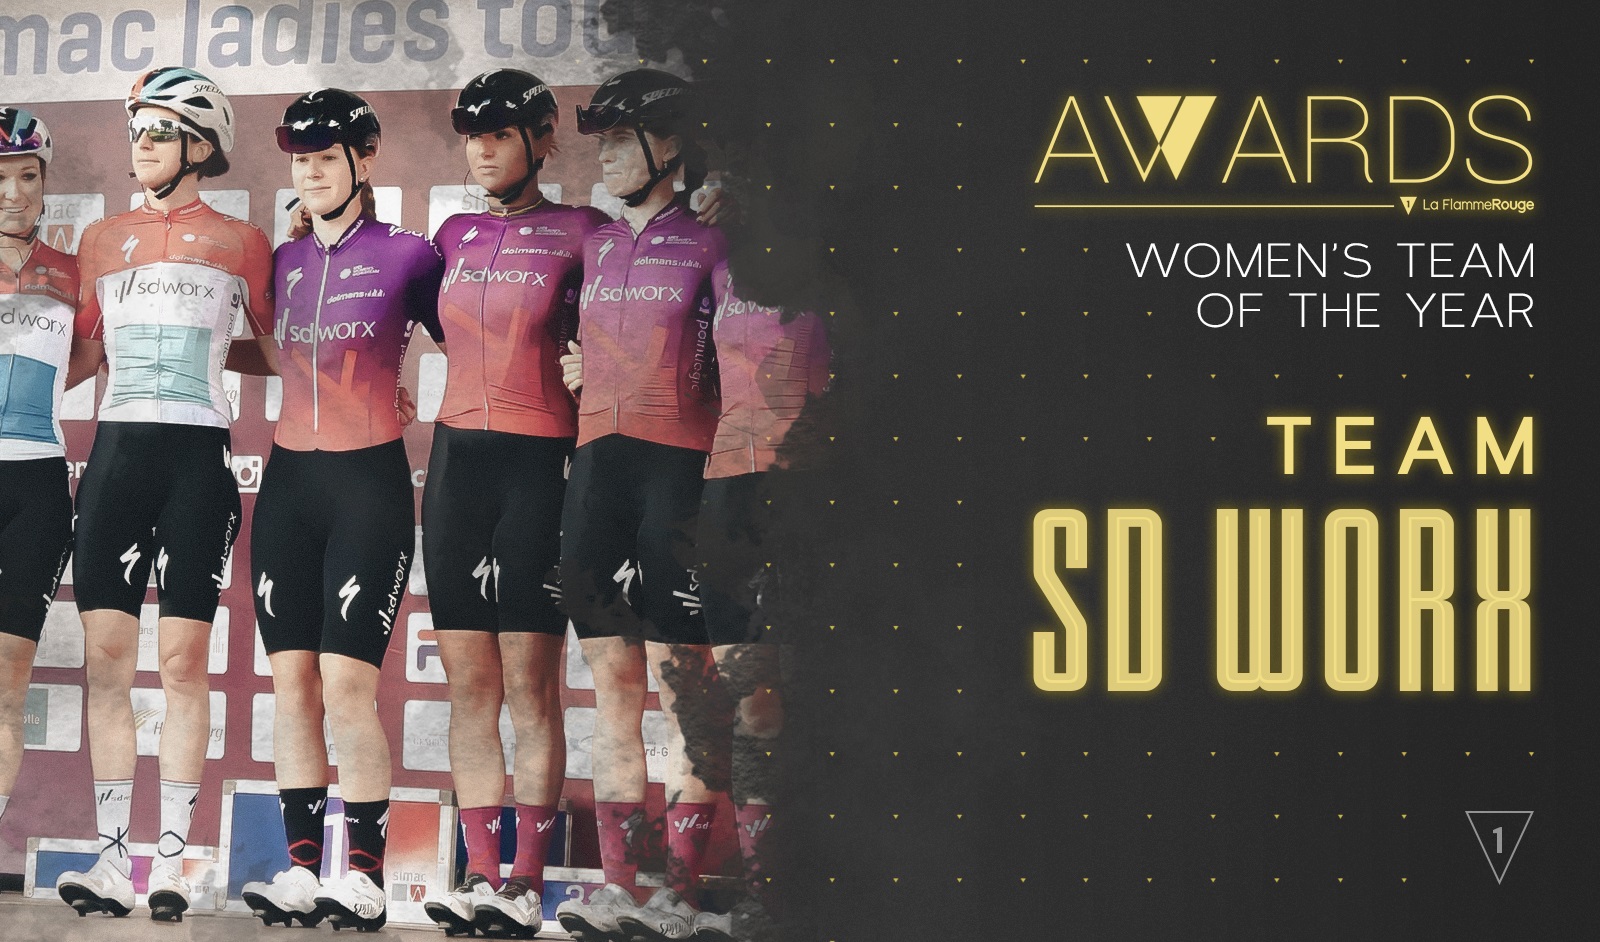 Women’s team of the year